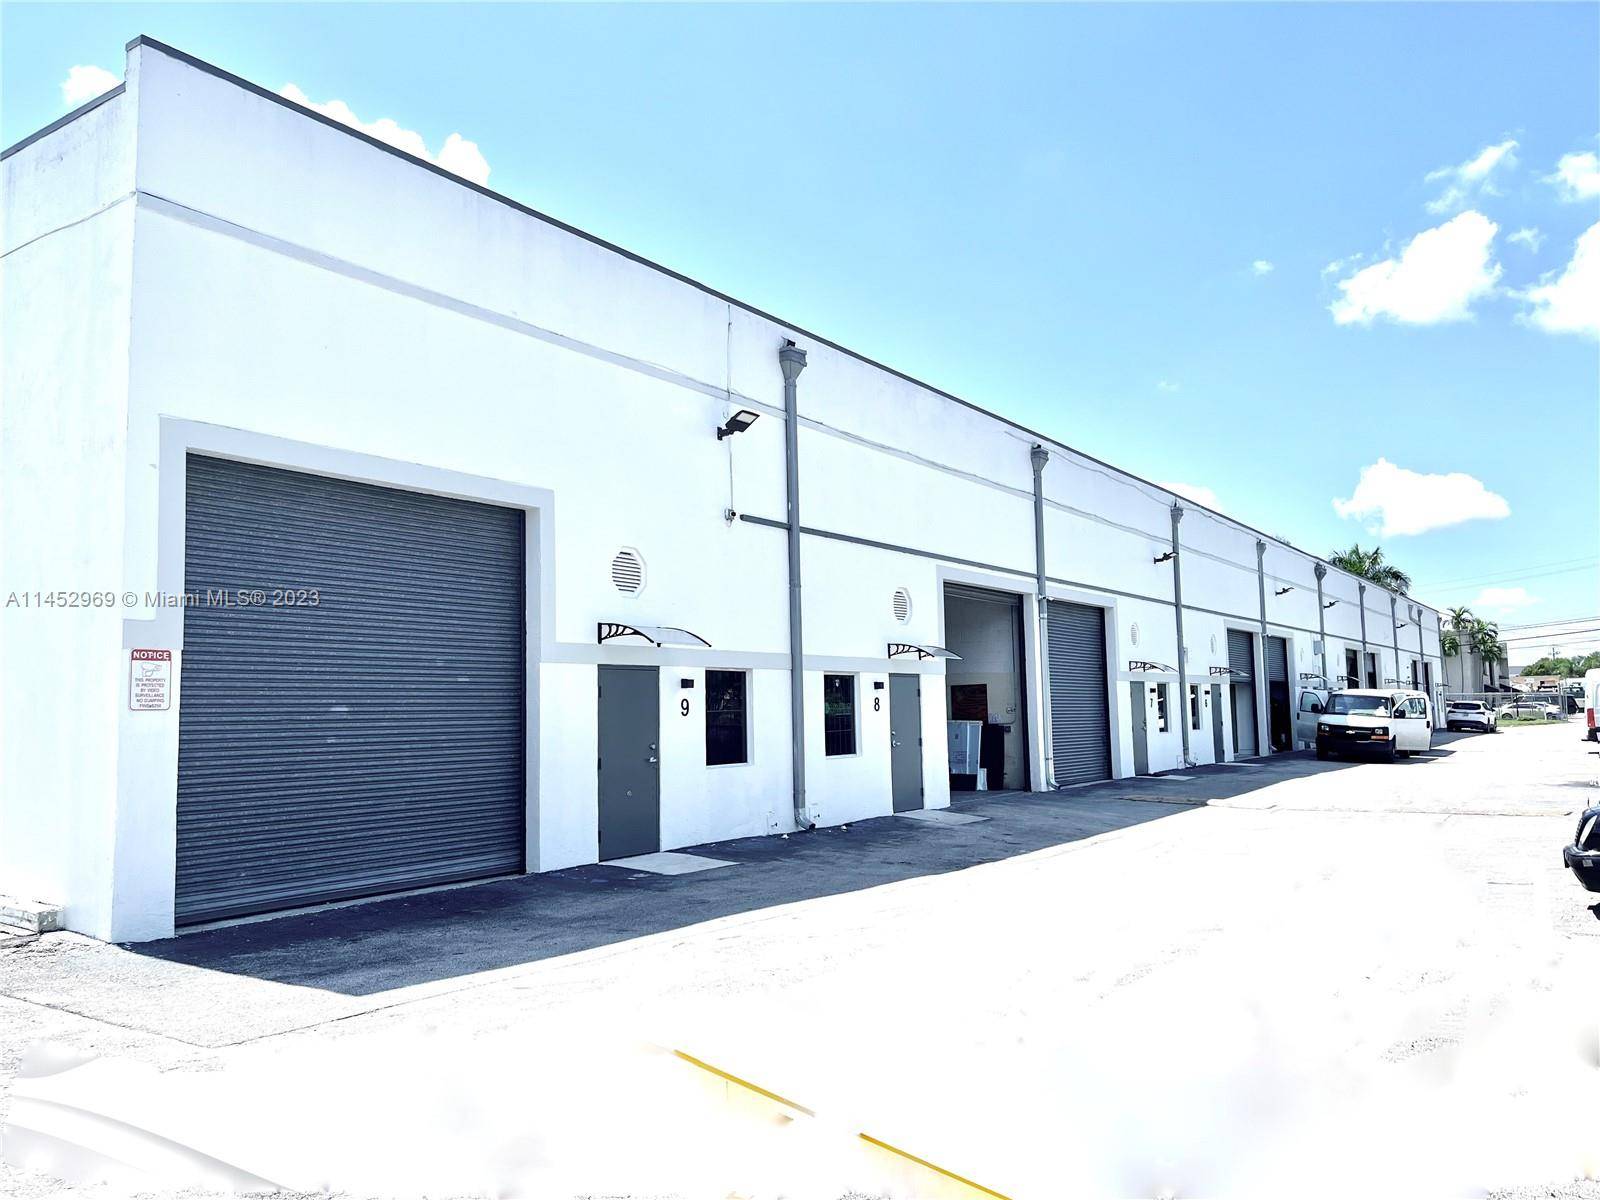 Centrally located Industrial office warehouse space.